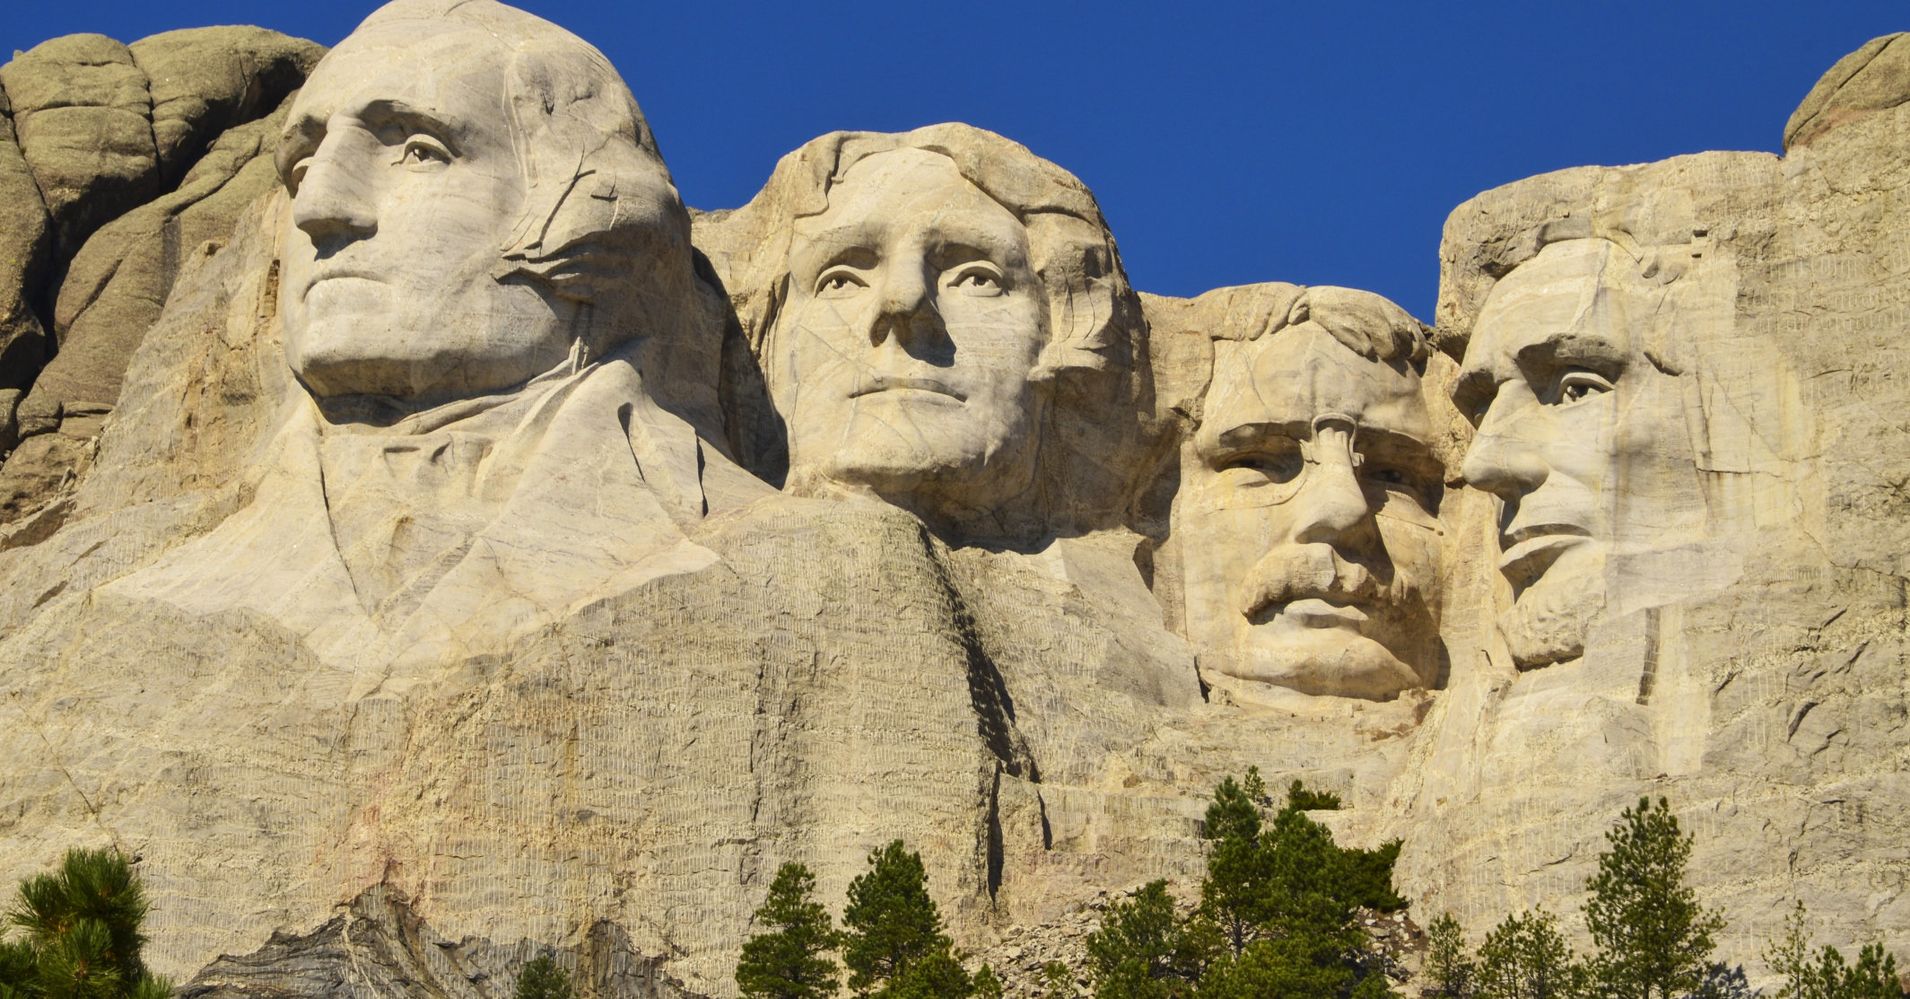 There's Been A Giant Room In Mount Rushmore This Whole Time | HuffPost